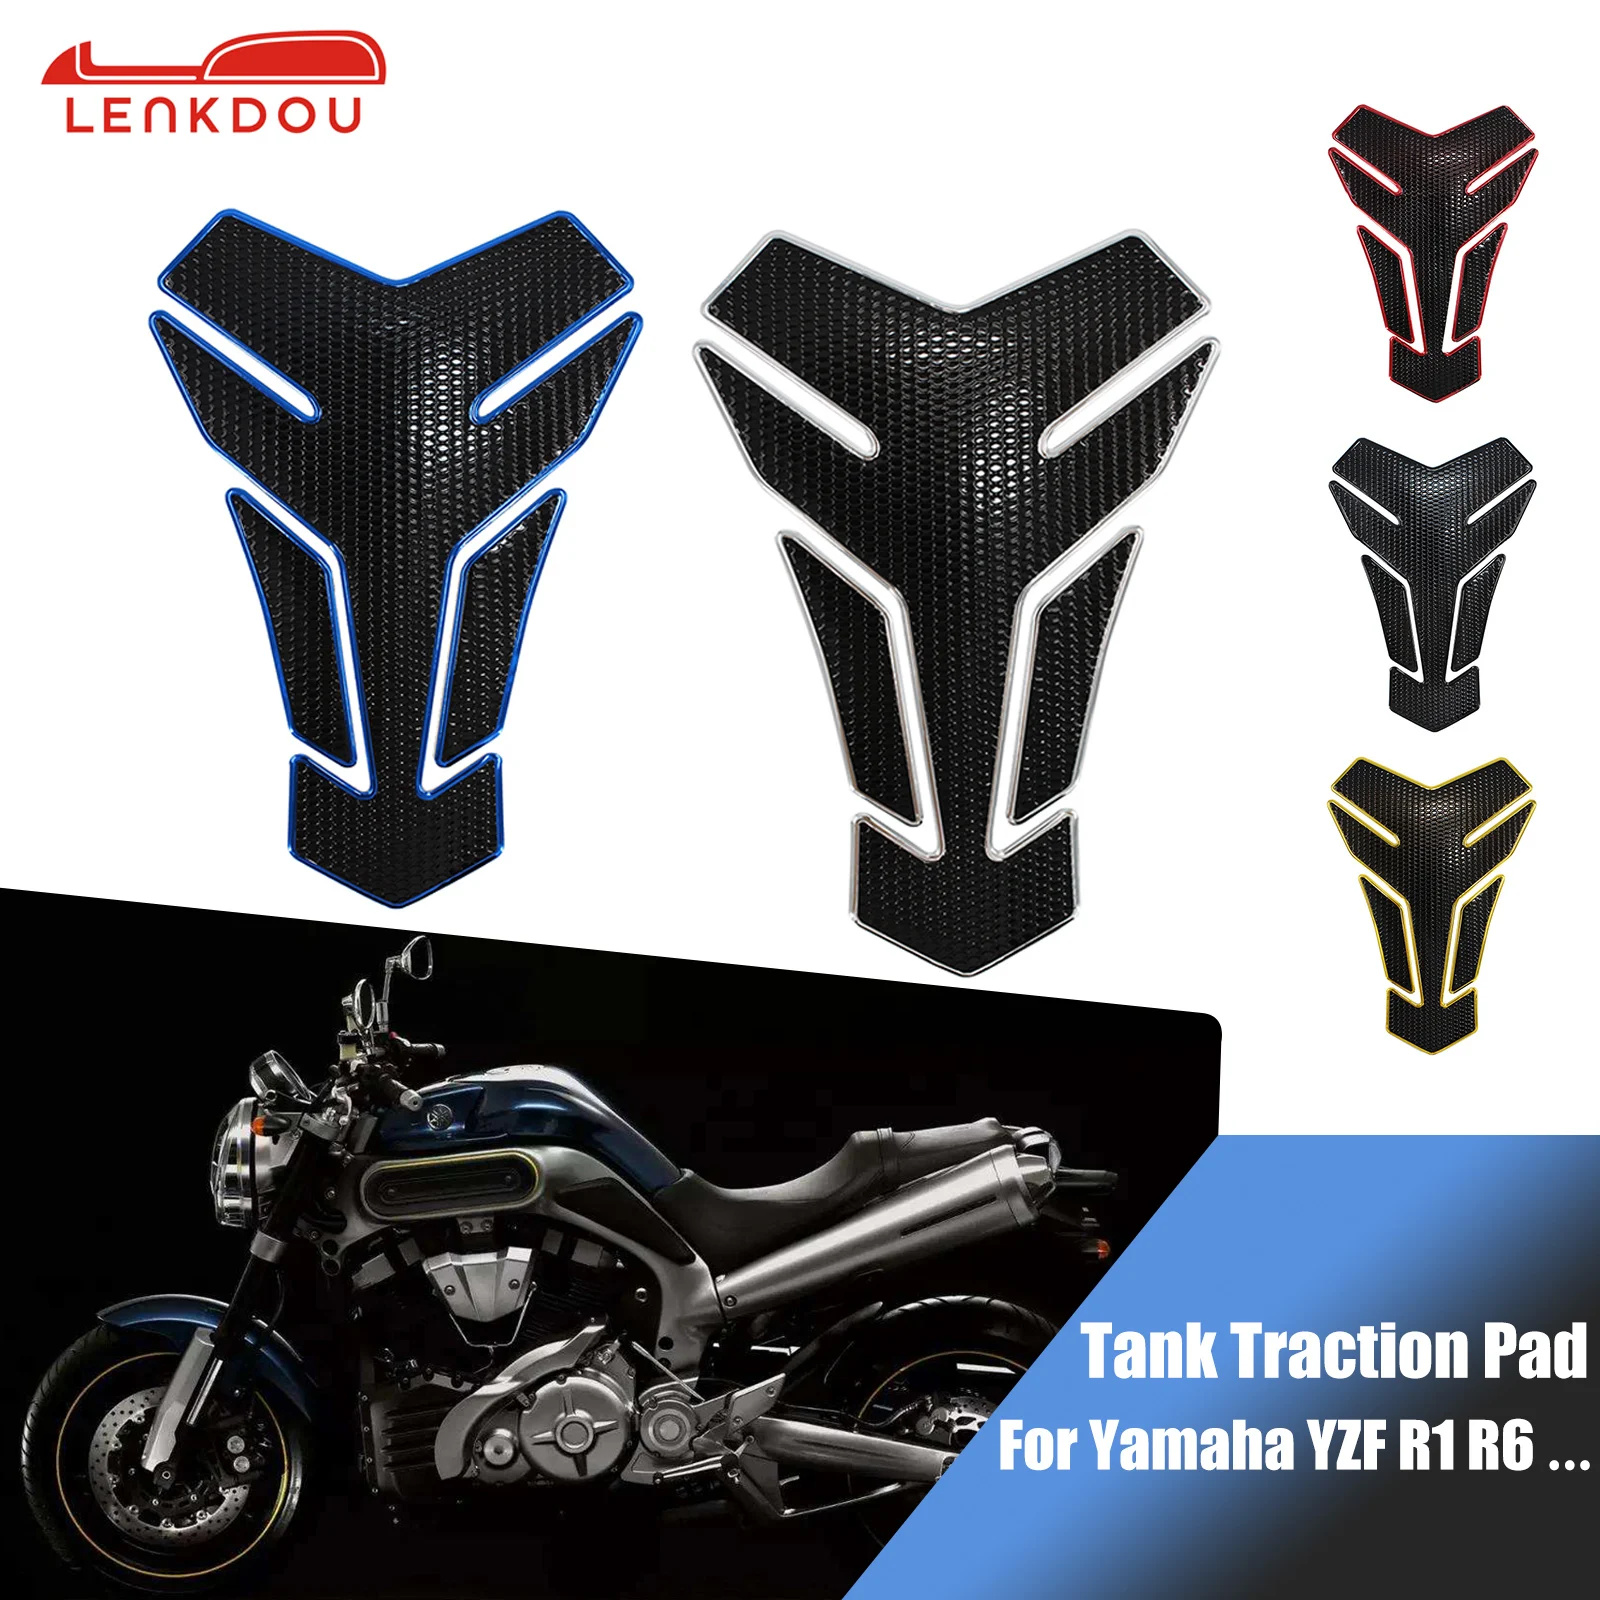 

3D Gas Fuel Tank Traction Pad Protector Sticker Decals For YAMAHA YZF R1 R6 MT01 FZ6 FZ8 FZ1 XJ6 XJR 400 Motorcycle Accessories